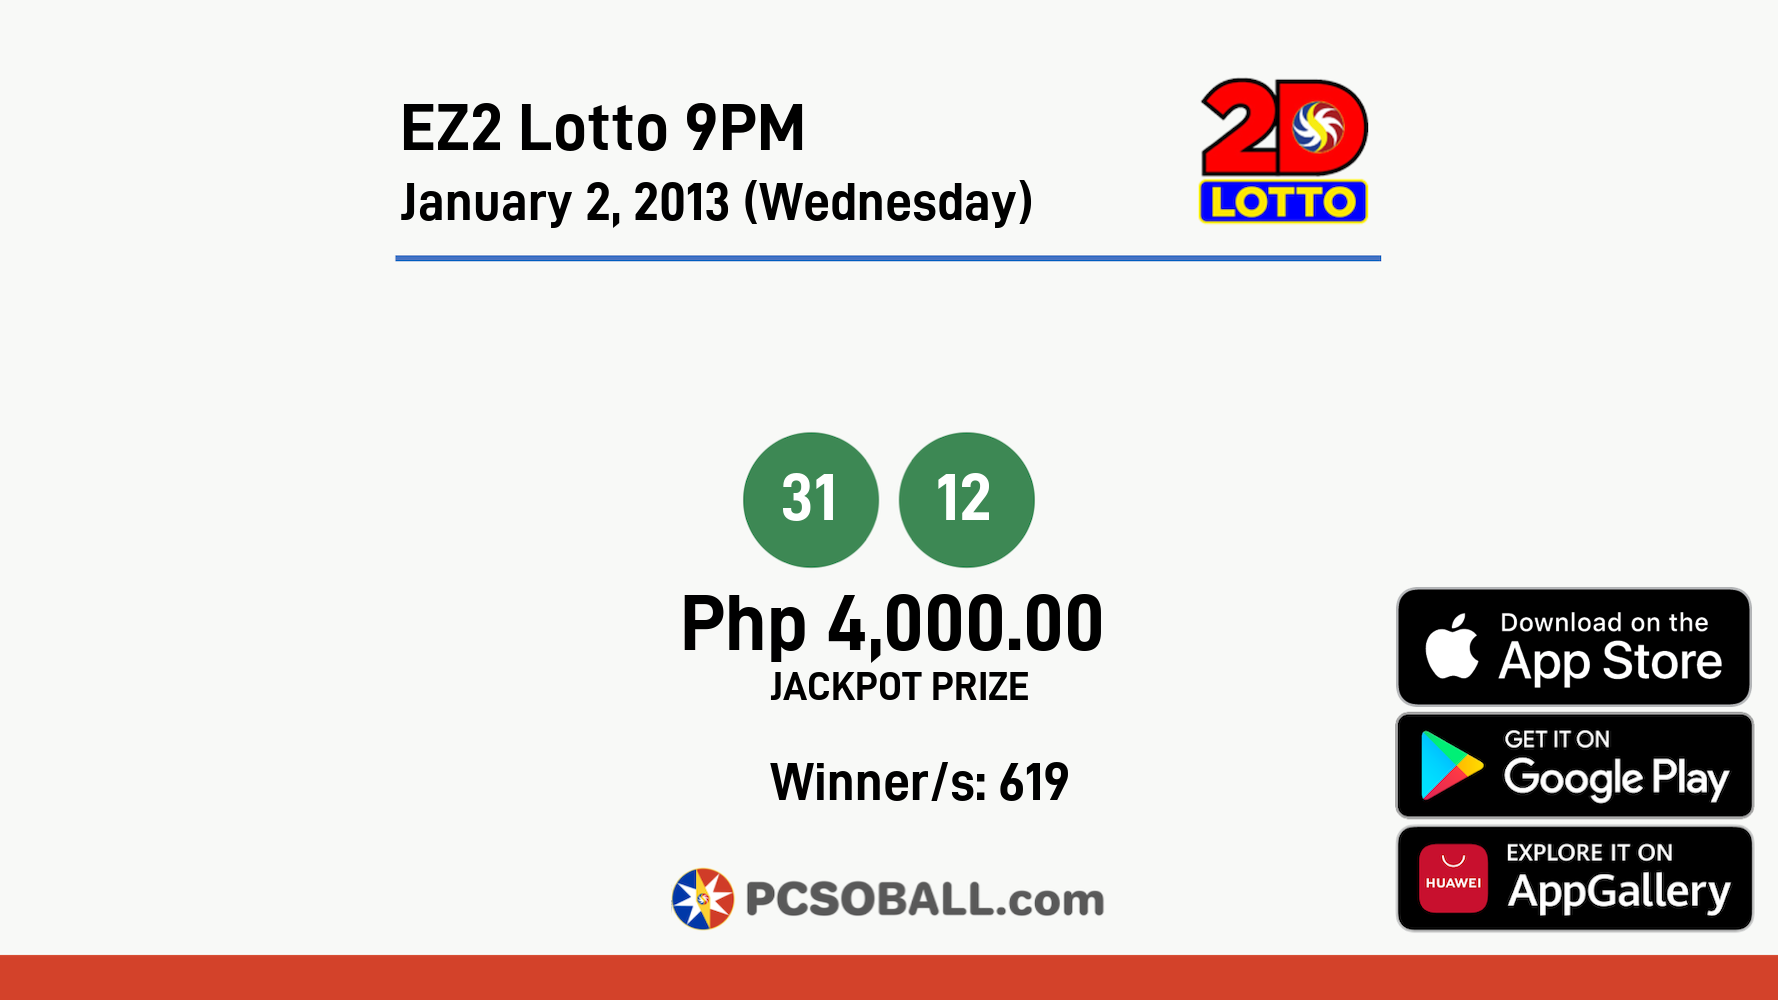 EZ2 Lotto 9PM January 2, 2013 (Wednesday) Result